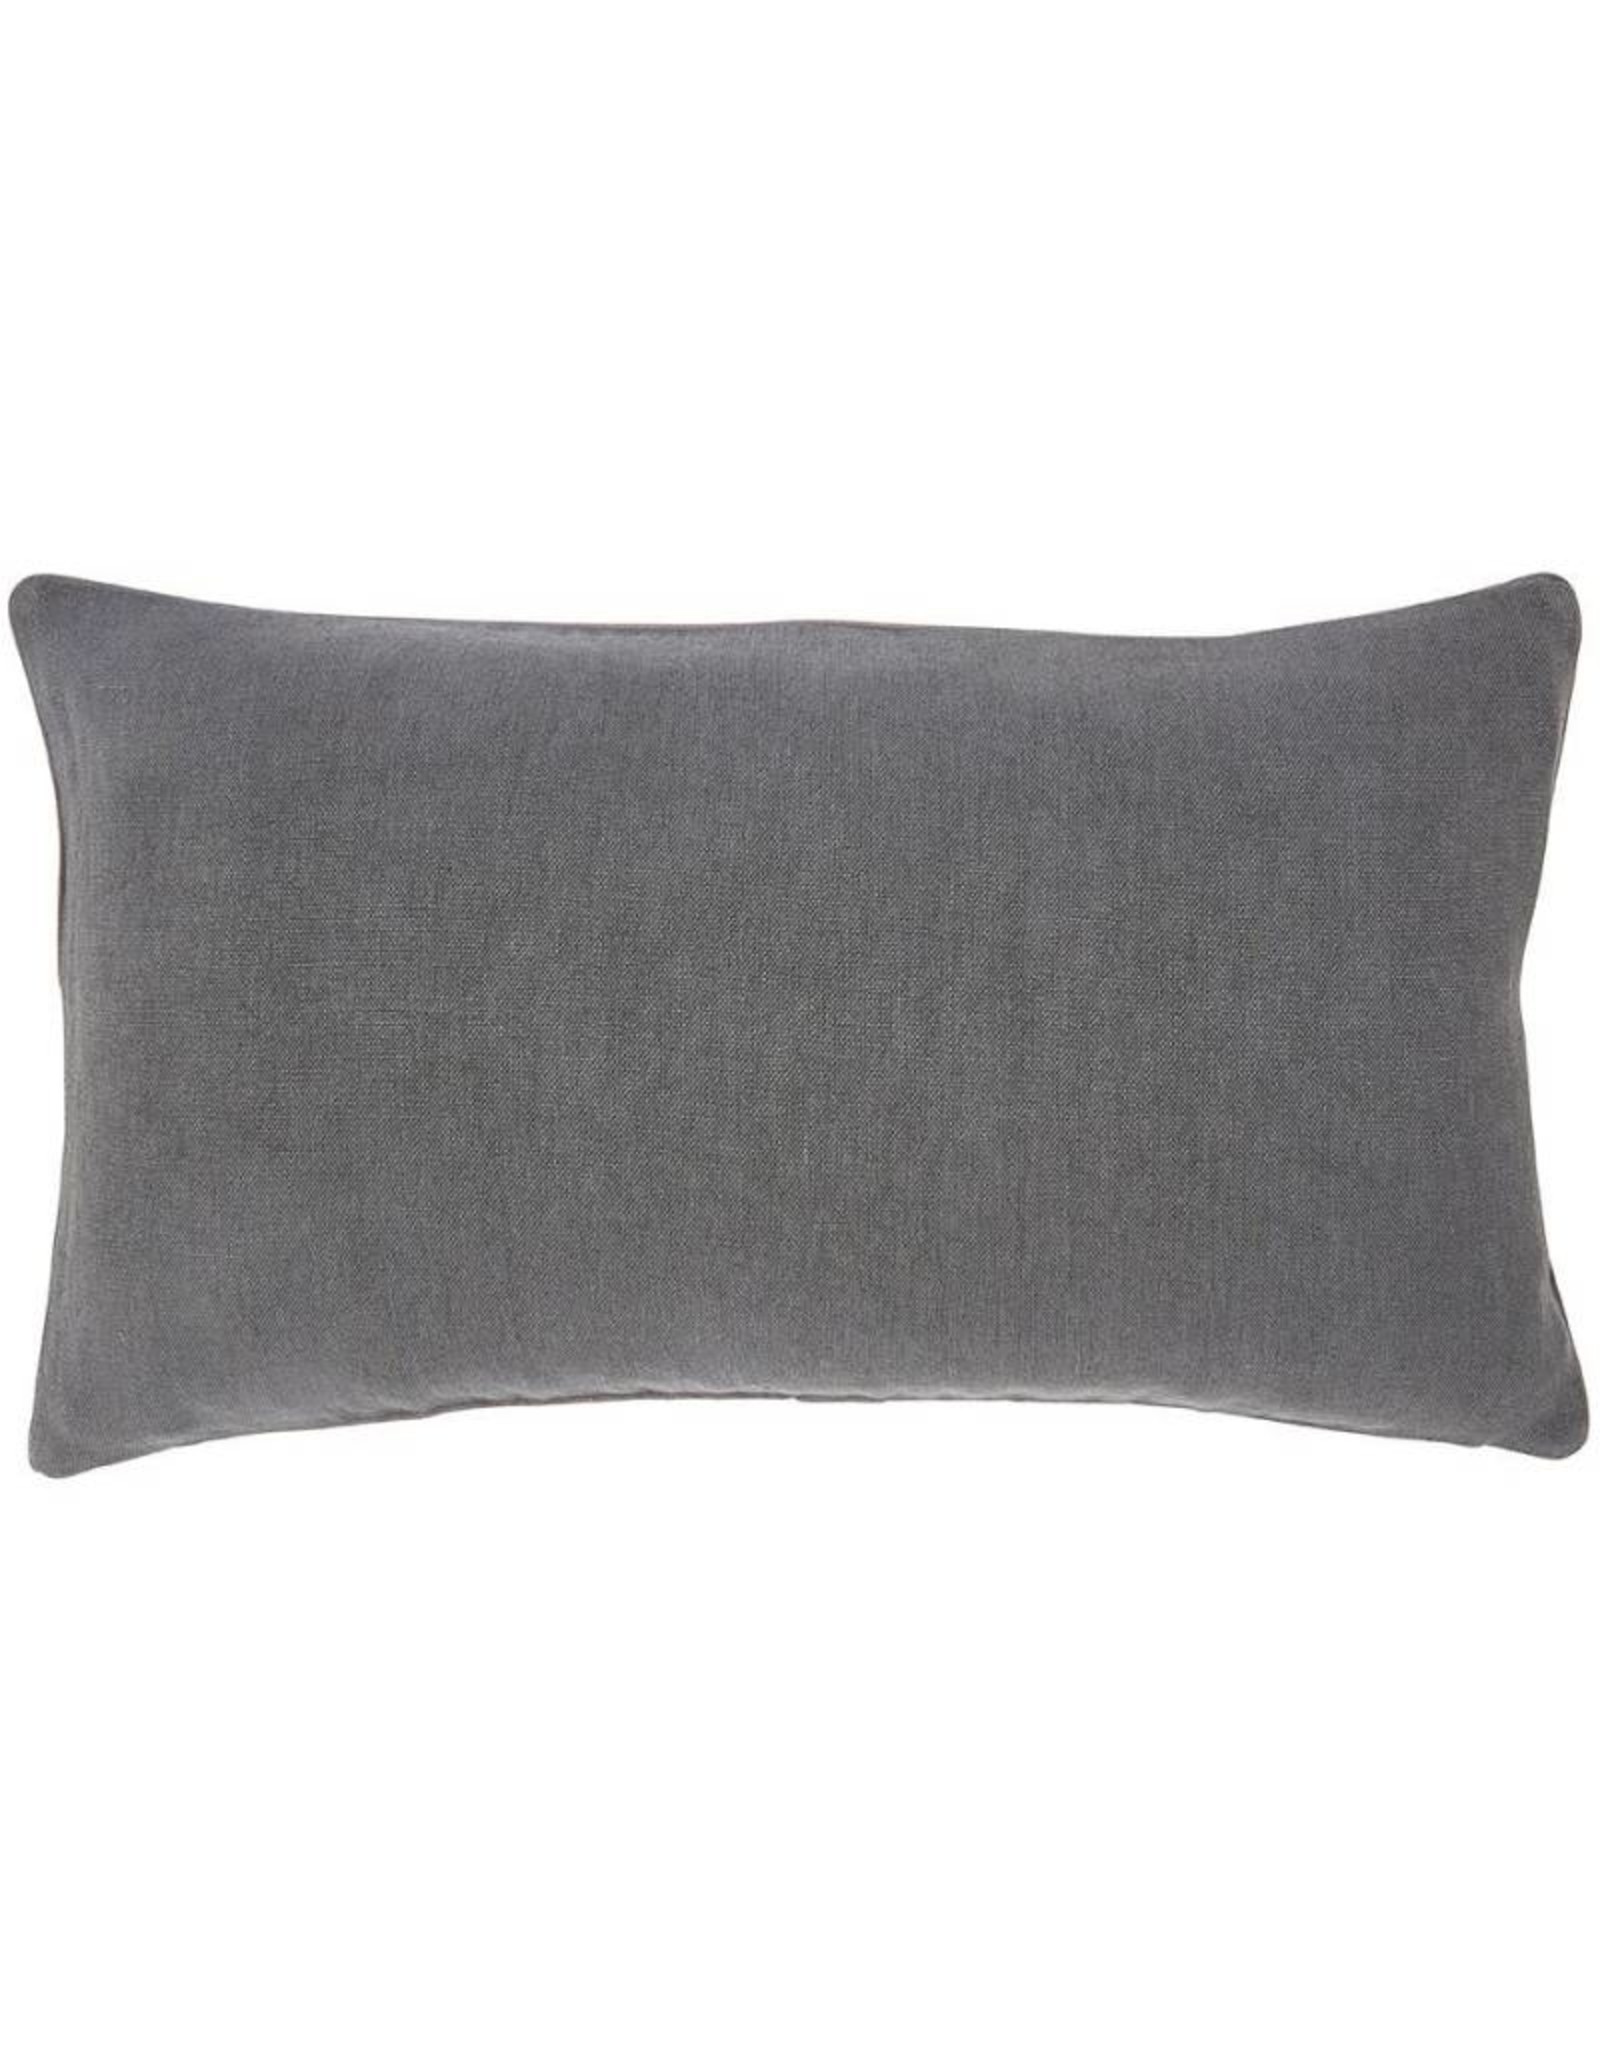 Iosis by Yves Delorme Pigment Decorative Pillow 13x22 by Iosis - Yves Delorme